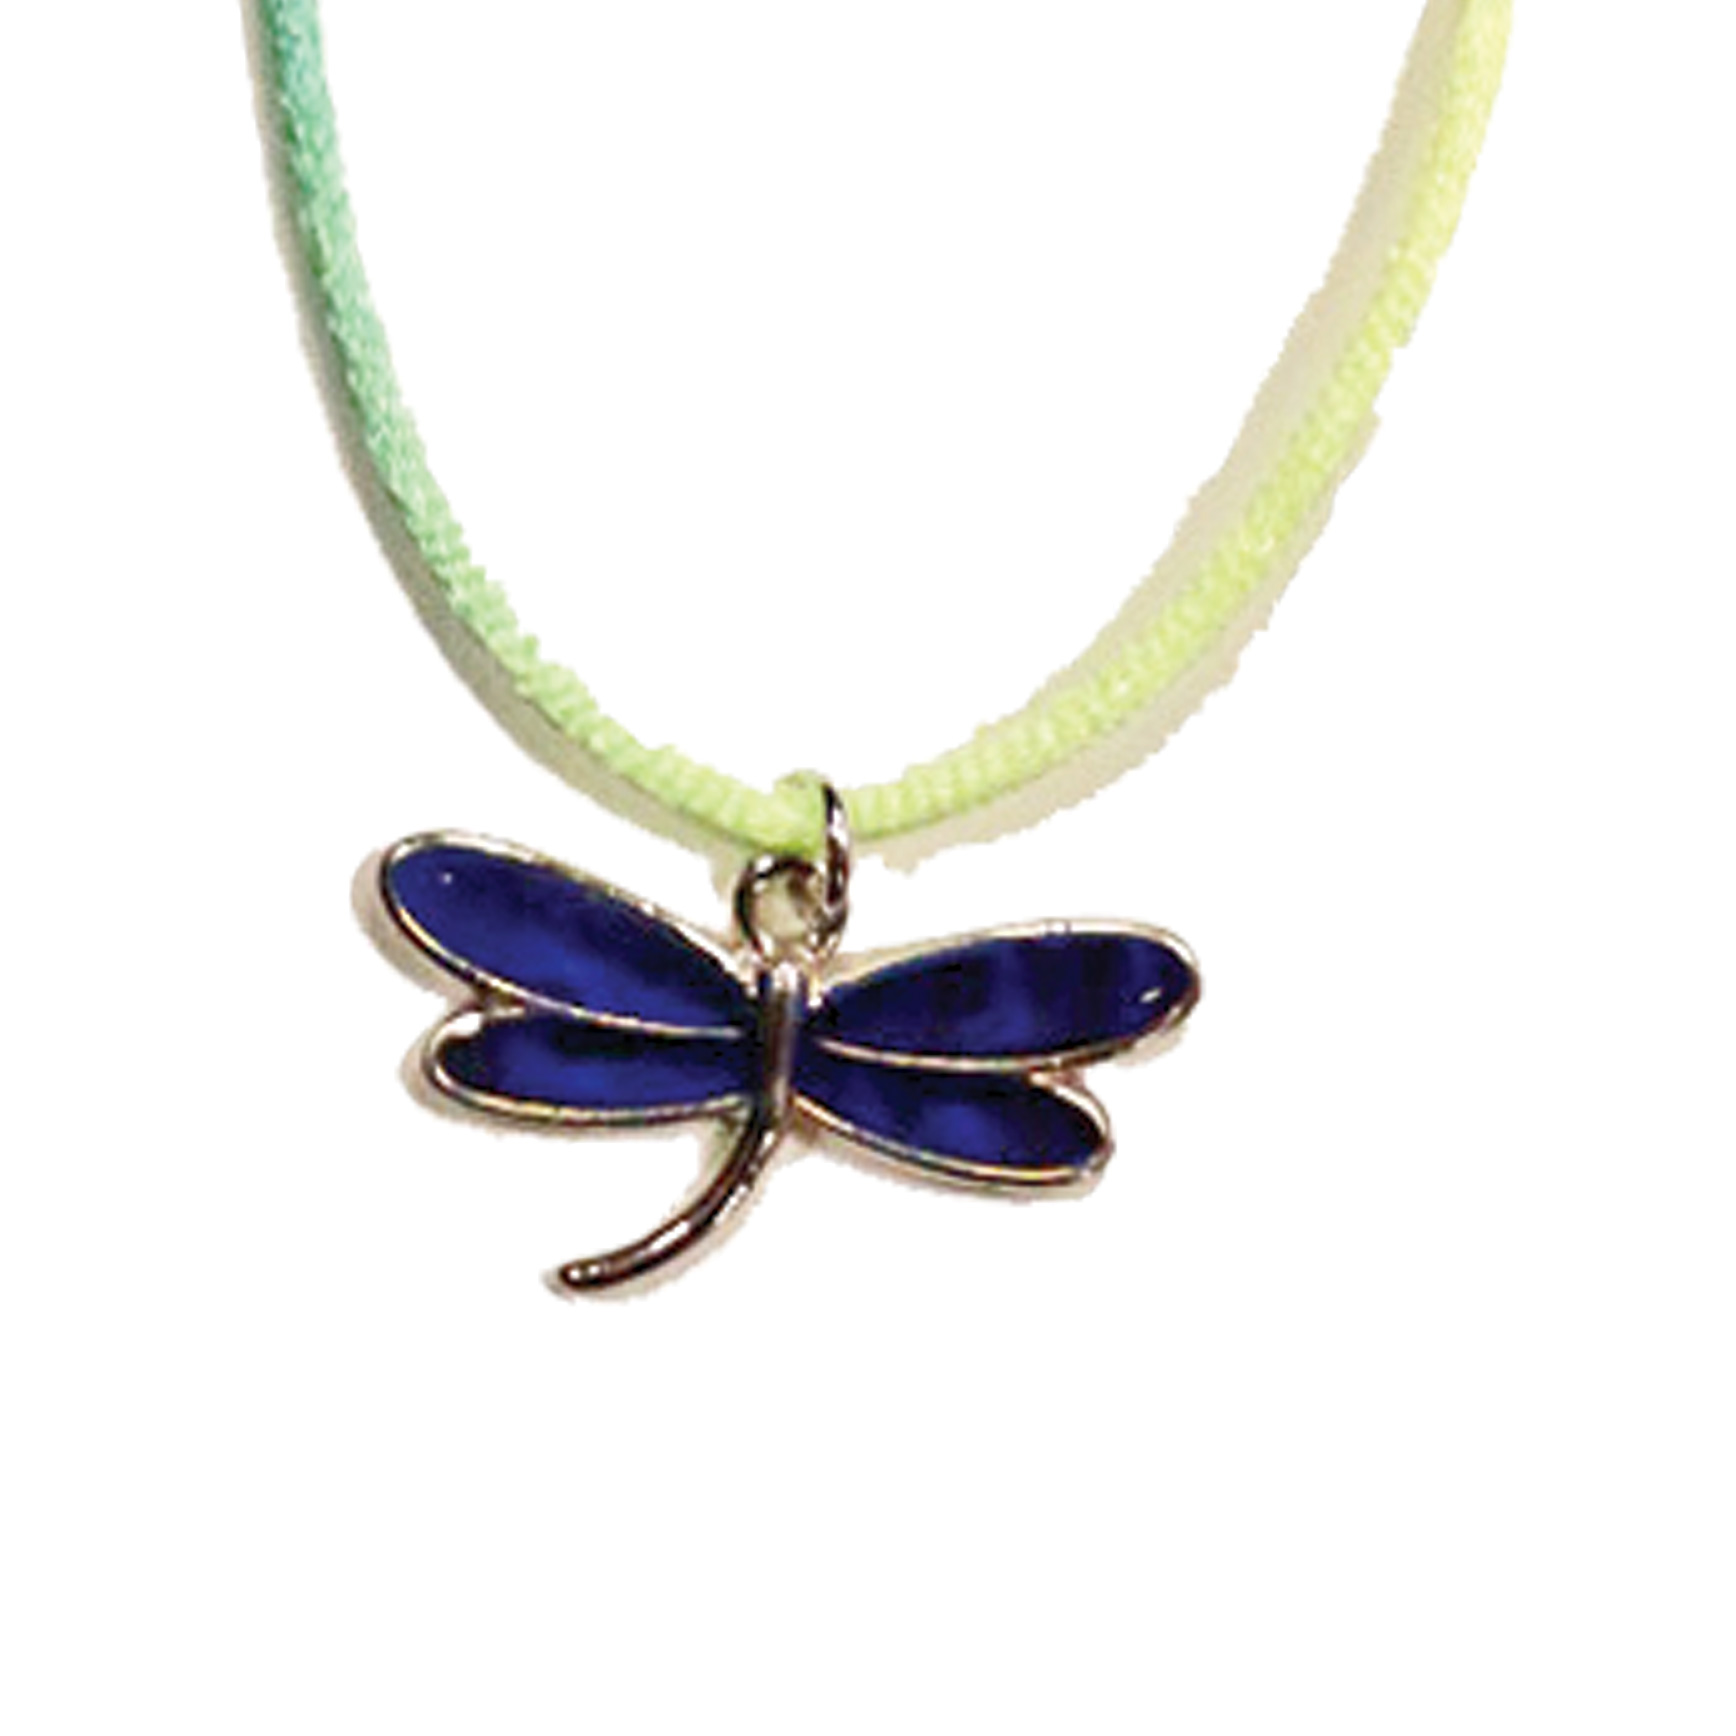 NECKLACE MOOD DRAGON FLY